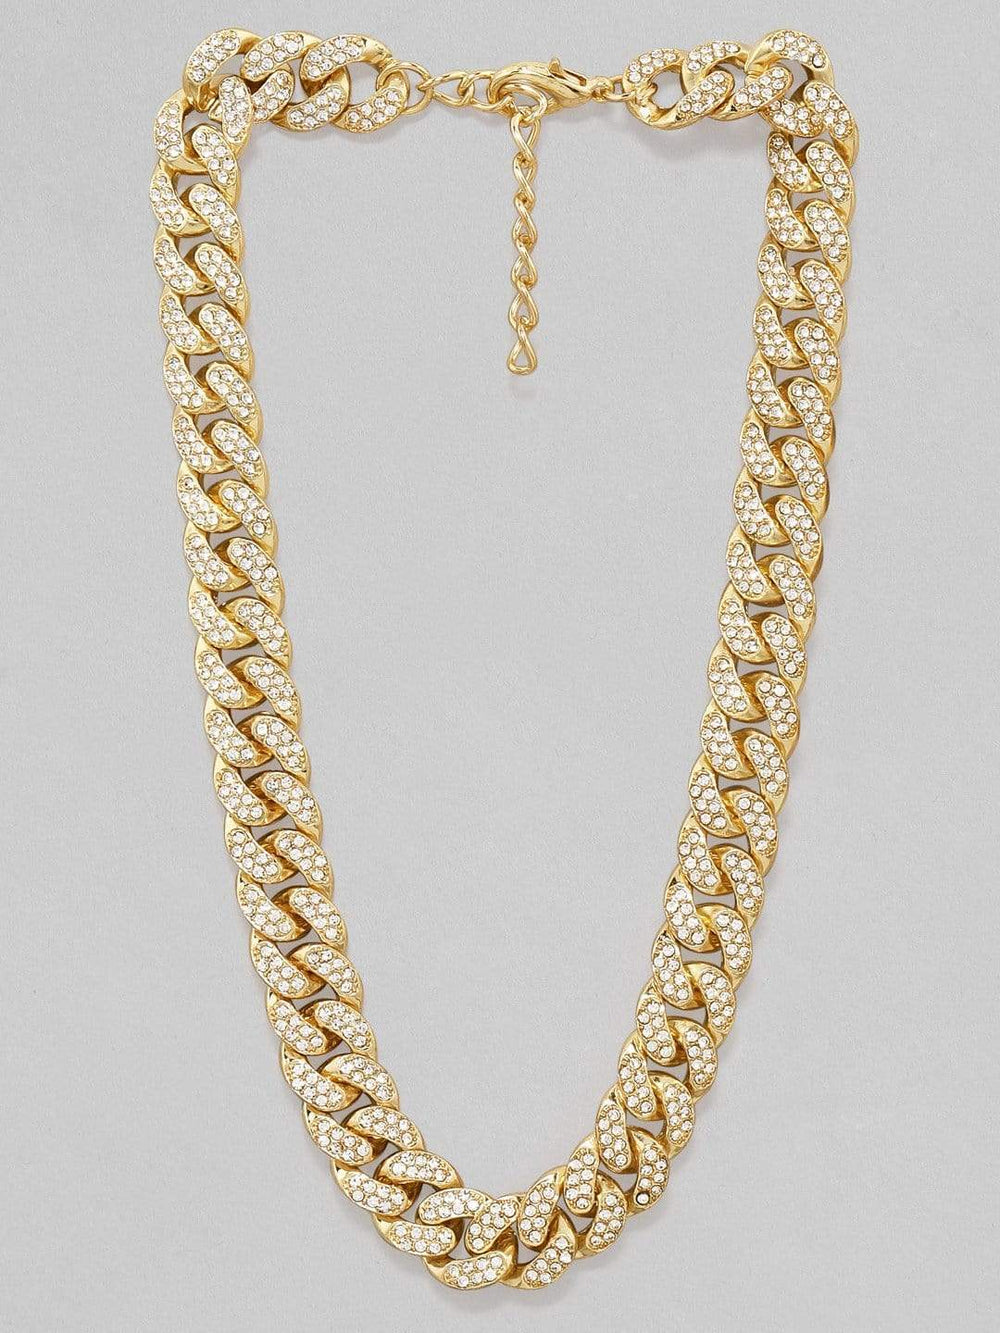 Rubans Gold Plated Handcrafted Rhinestone Interlink Chain Necklace Chain & Necklaces